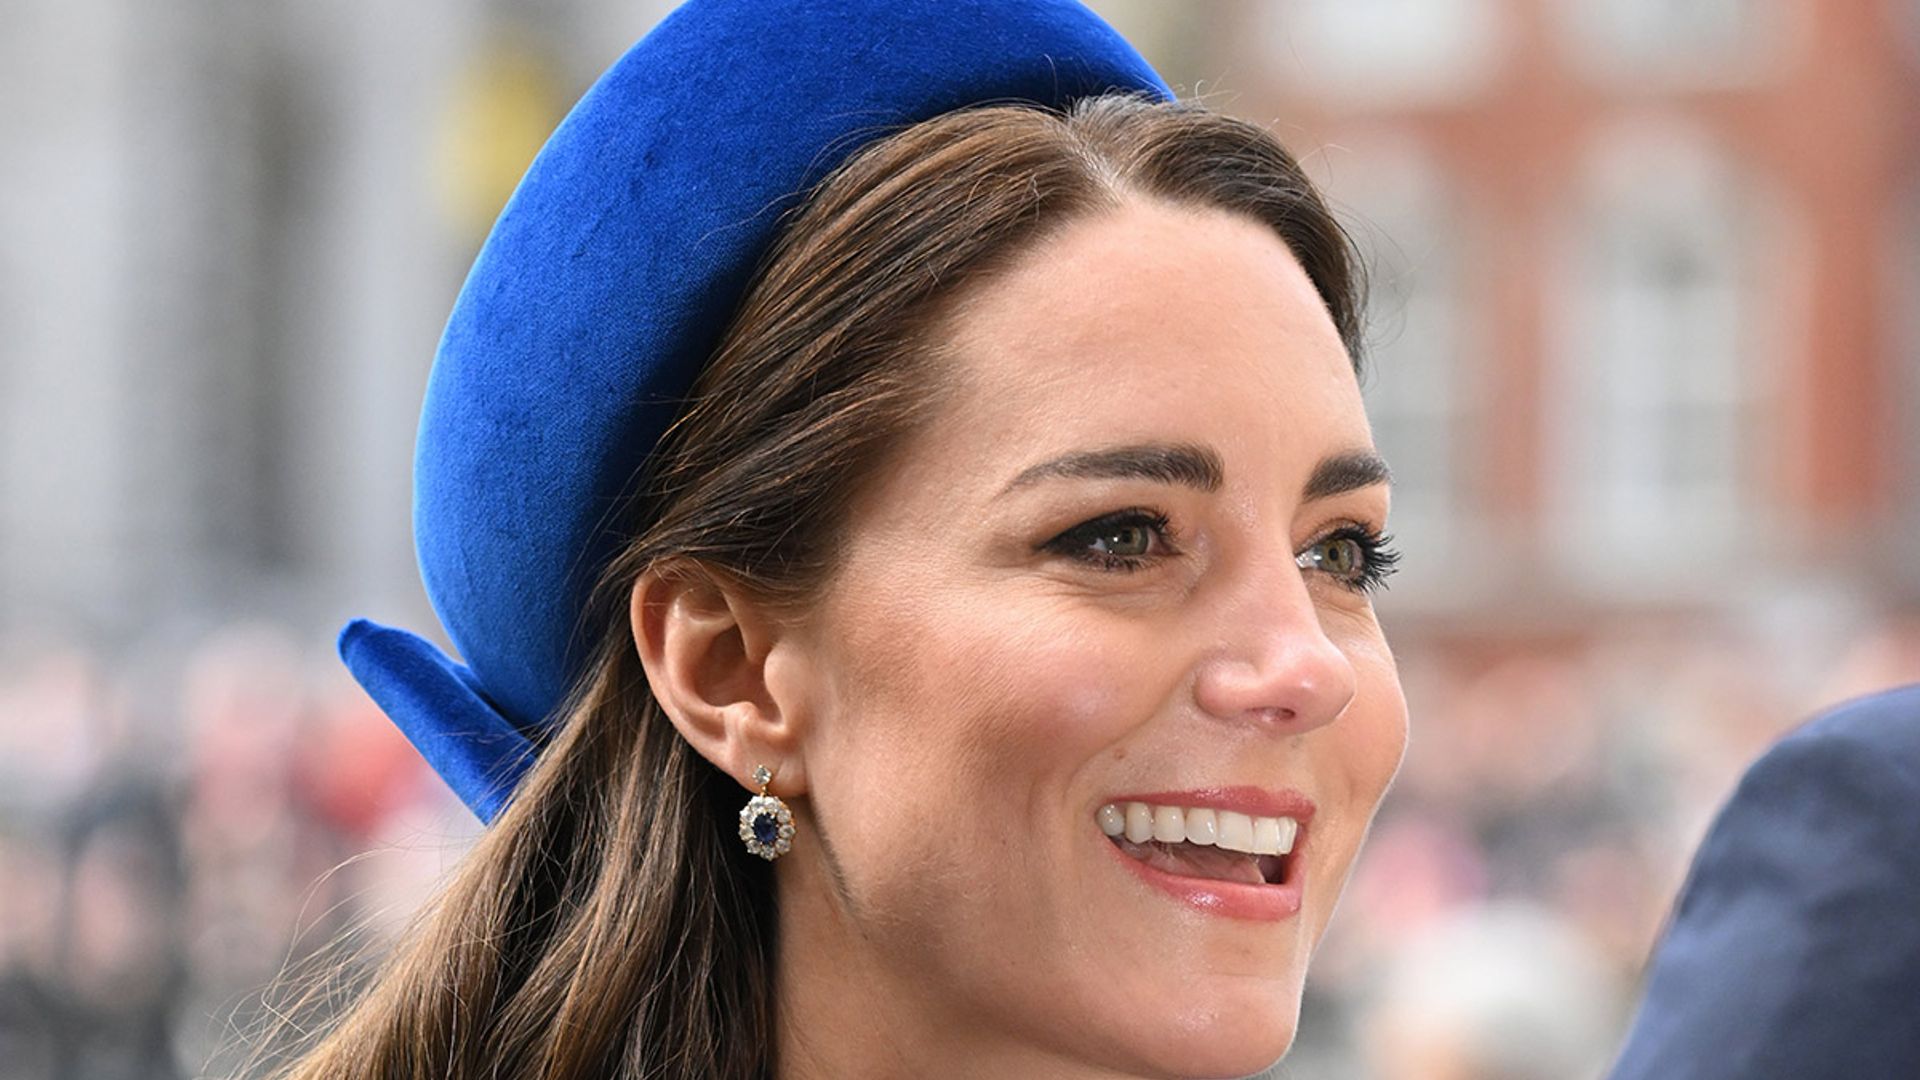 Kate Middleton's most popular dress to rent revealed - and it costs way less than you think